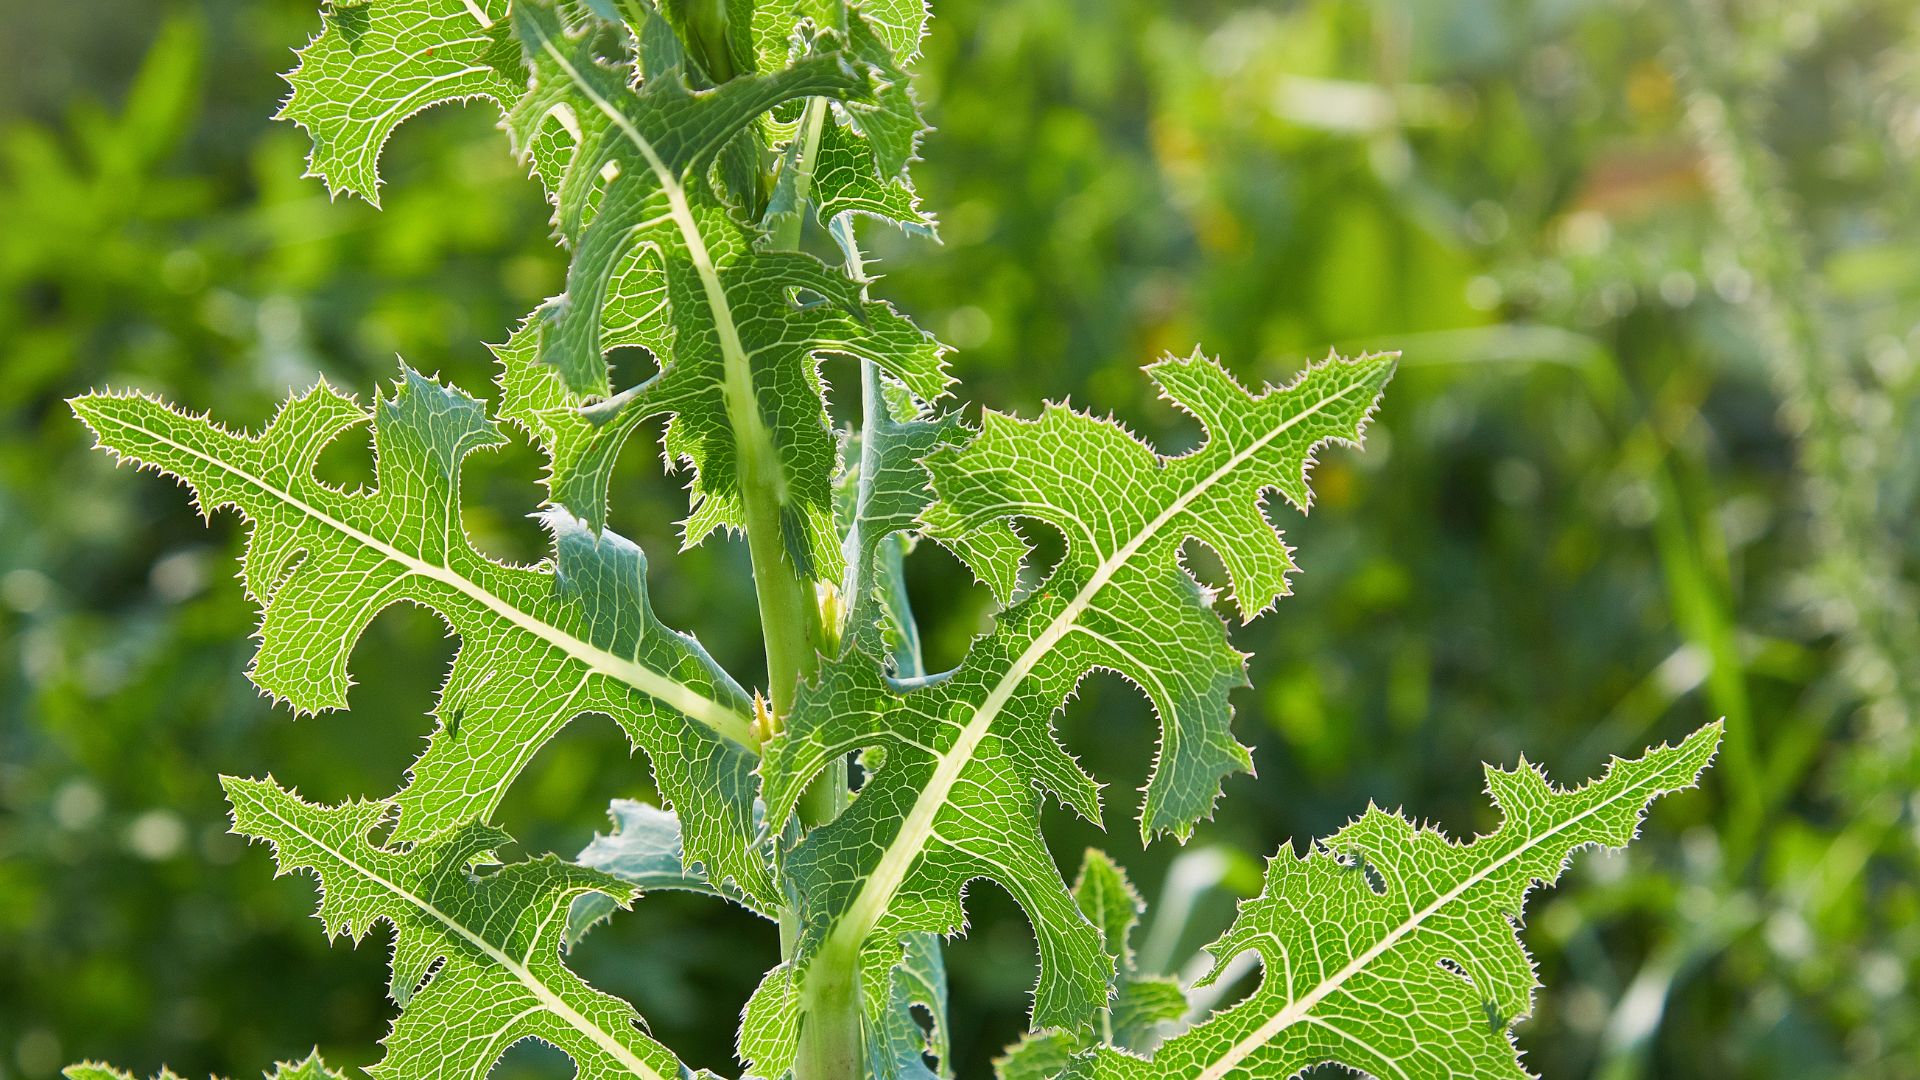 Say Goodbye To Prickly Lettuce Weeds With This Simple Yet Effective Hack